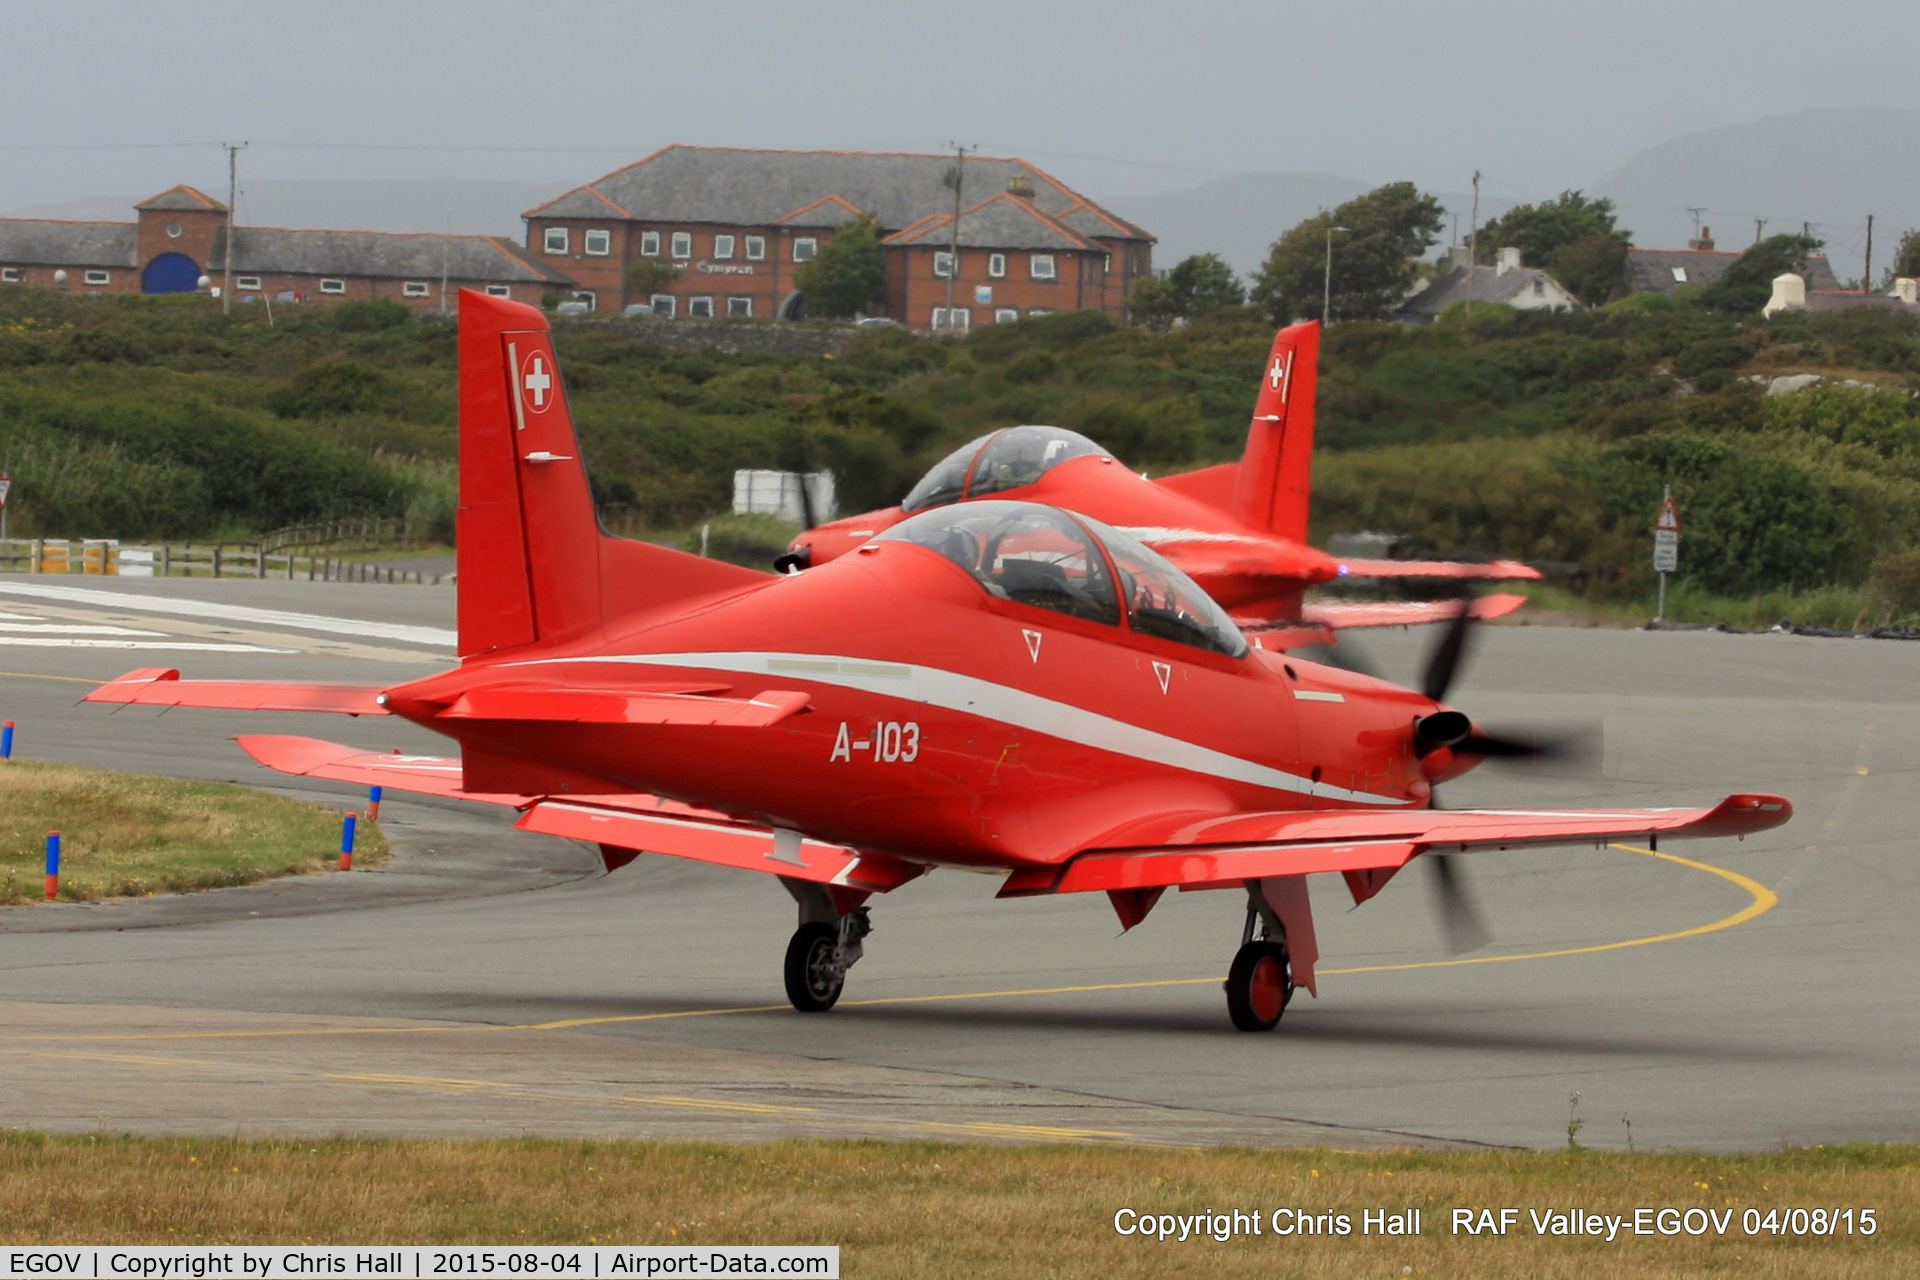 Anglesey Airport (Maes Awyr Môn) or RAF Valley, Anglesey United Kingdom (EGOV) - Swiss Air Force Pilatus PC-21's during a week long exercise at RAF Valley